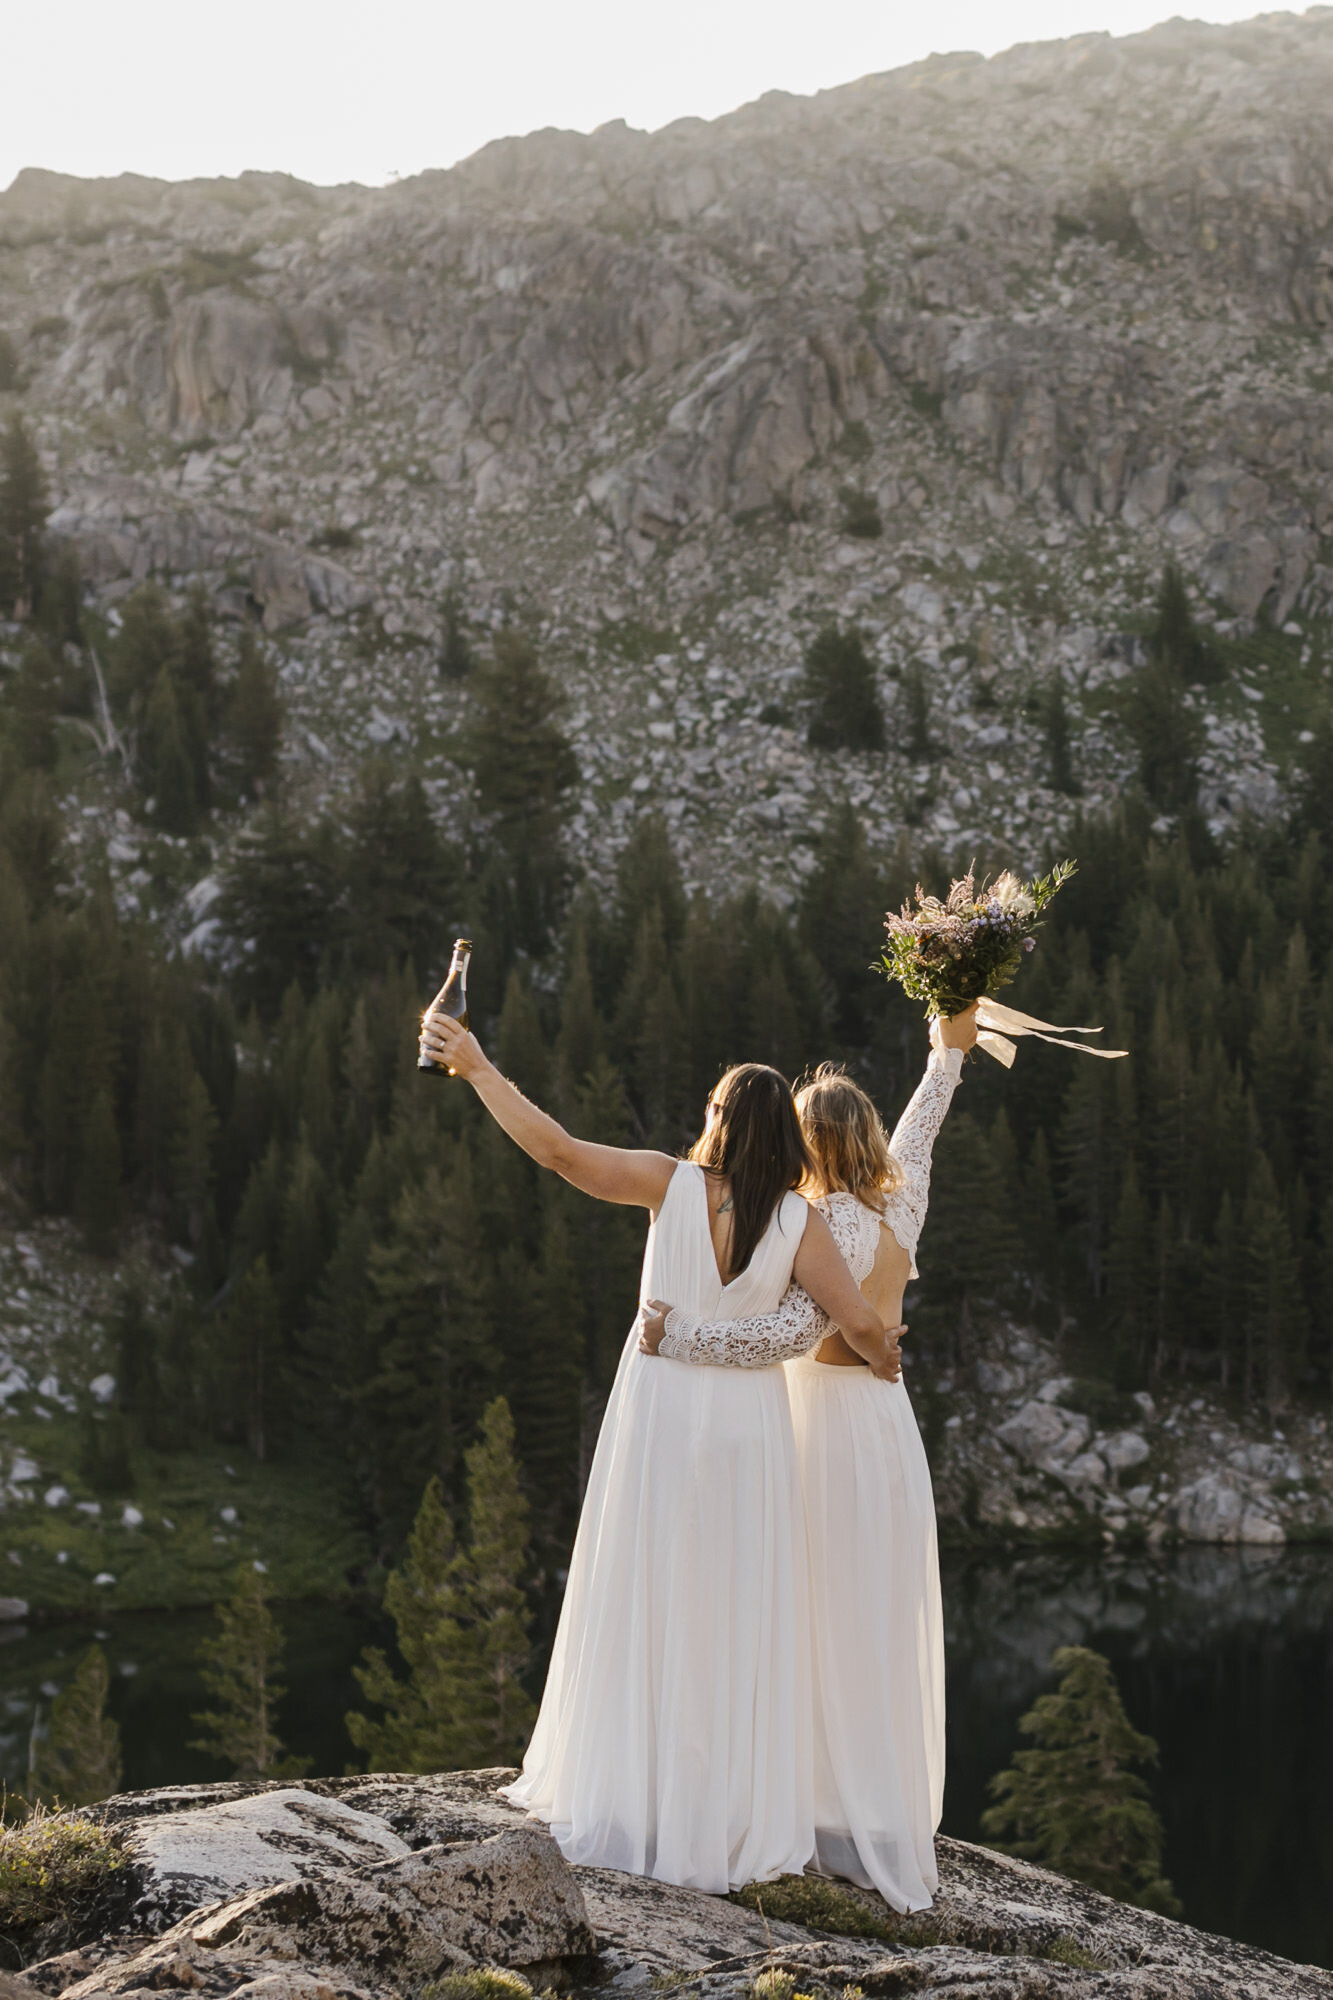 Two brides toast the sunrise with champagne in celebration of their adventurous mountain wedding